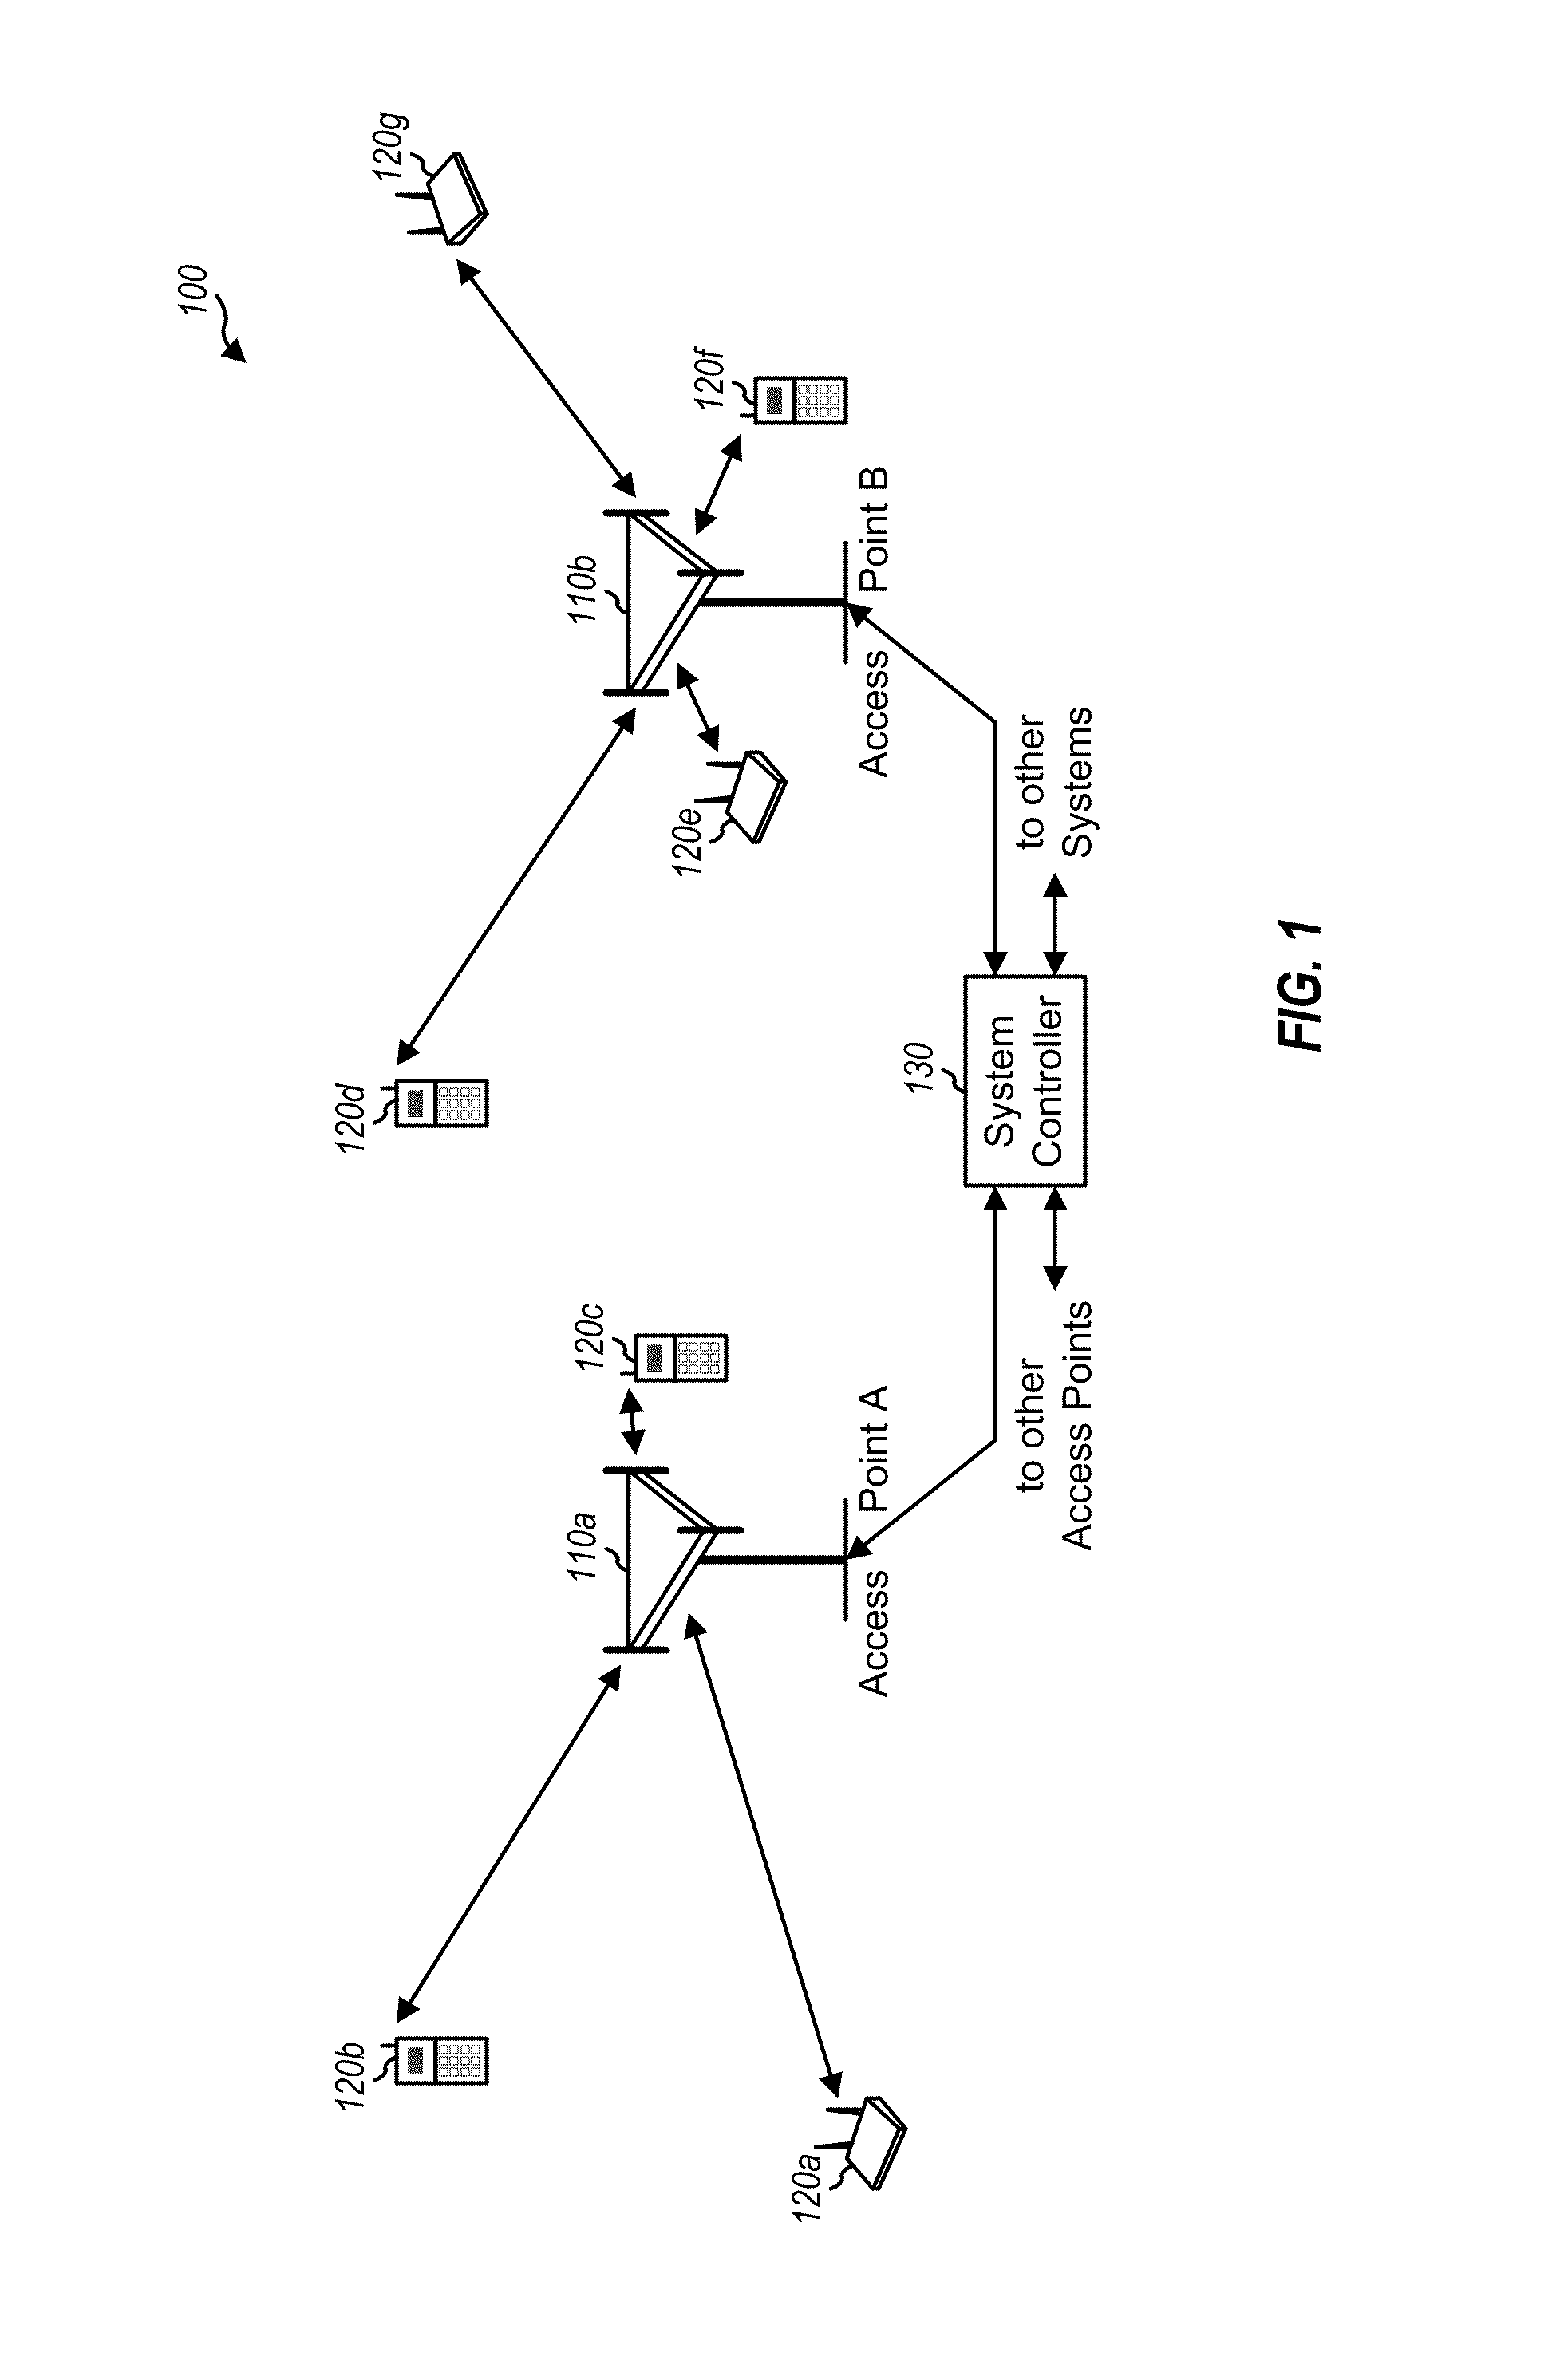 Peak-to-average power ratio management for multi-carrier modulation in wireless communication systems